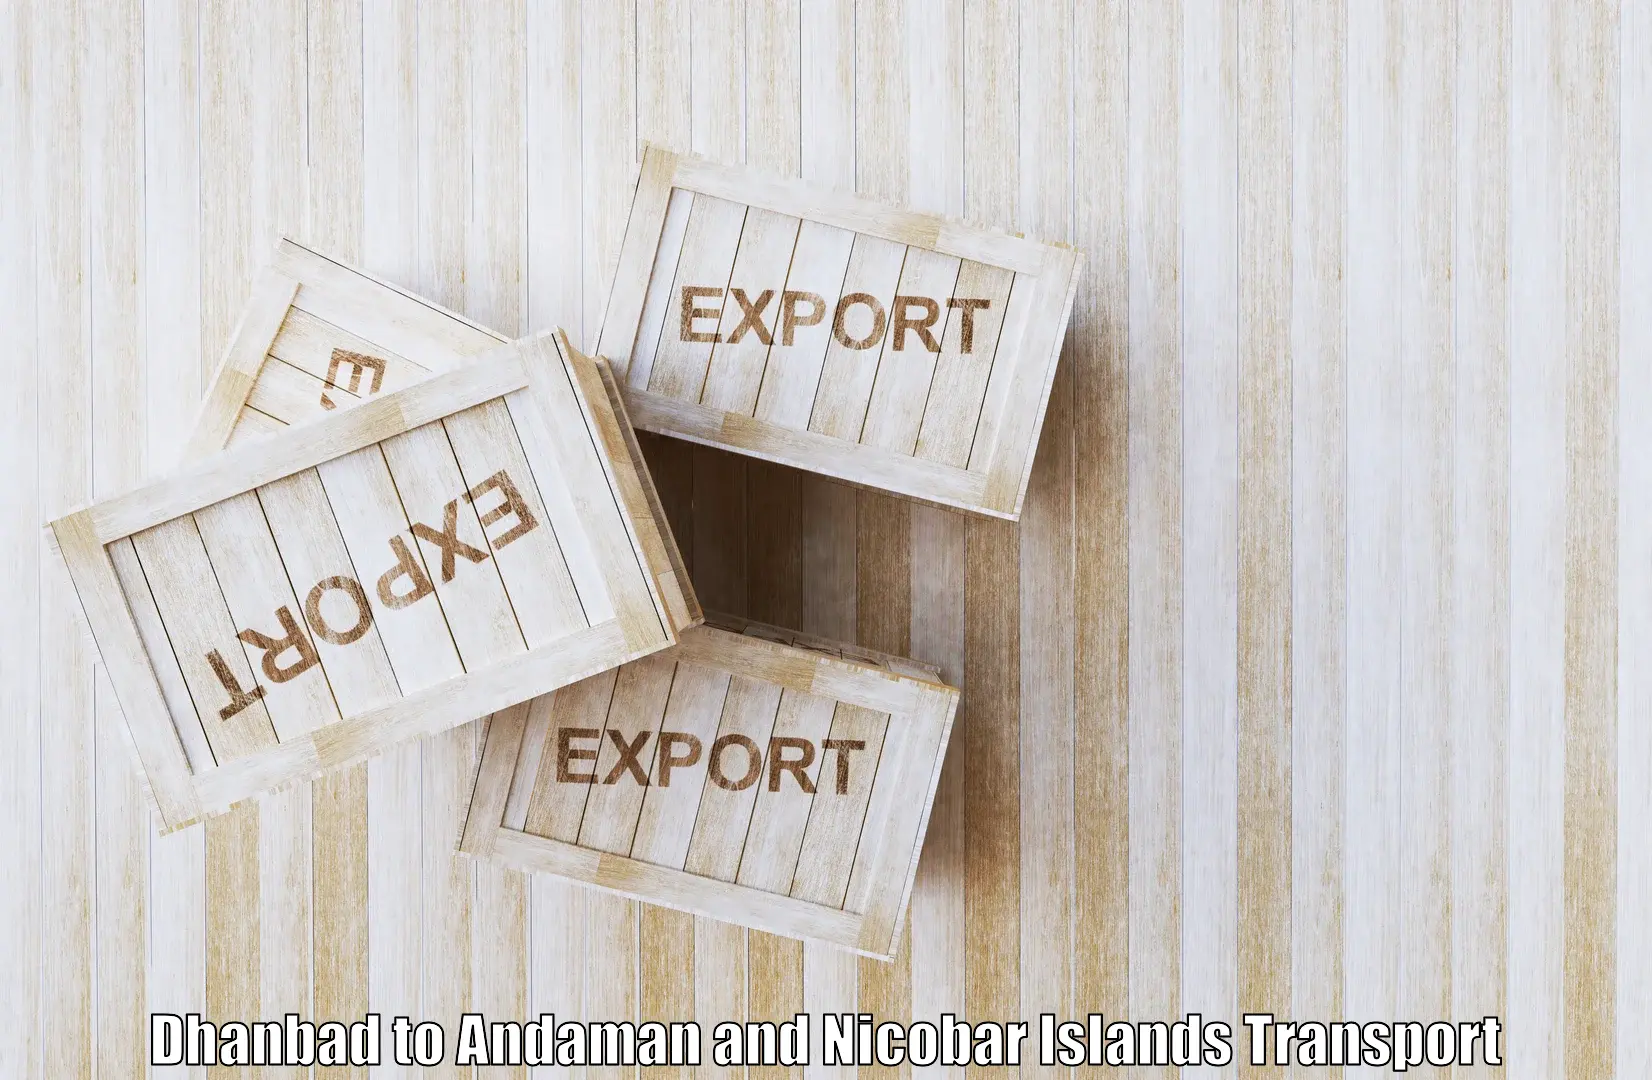 Goods transport services Dhanbad to Andaman and Nicobar Islands